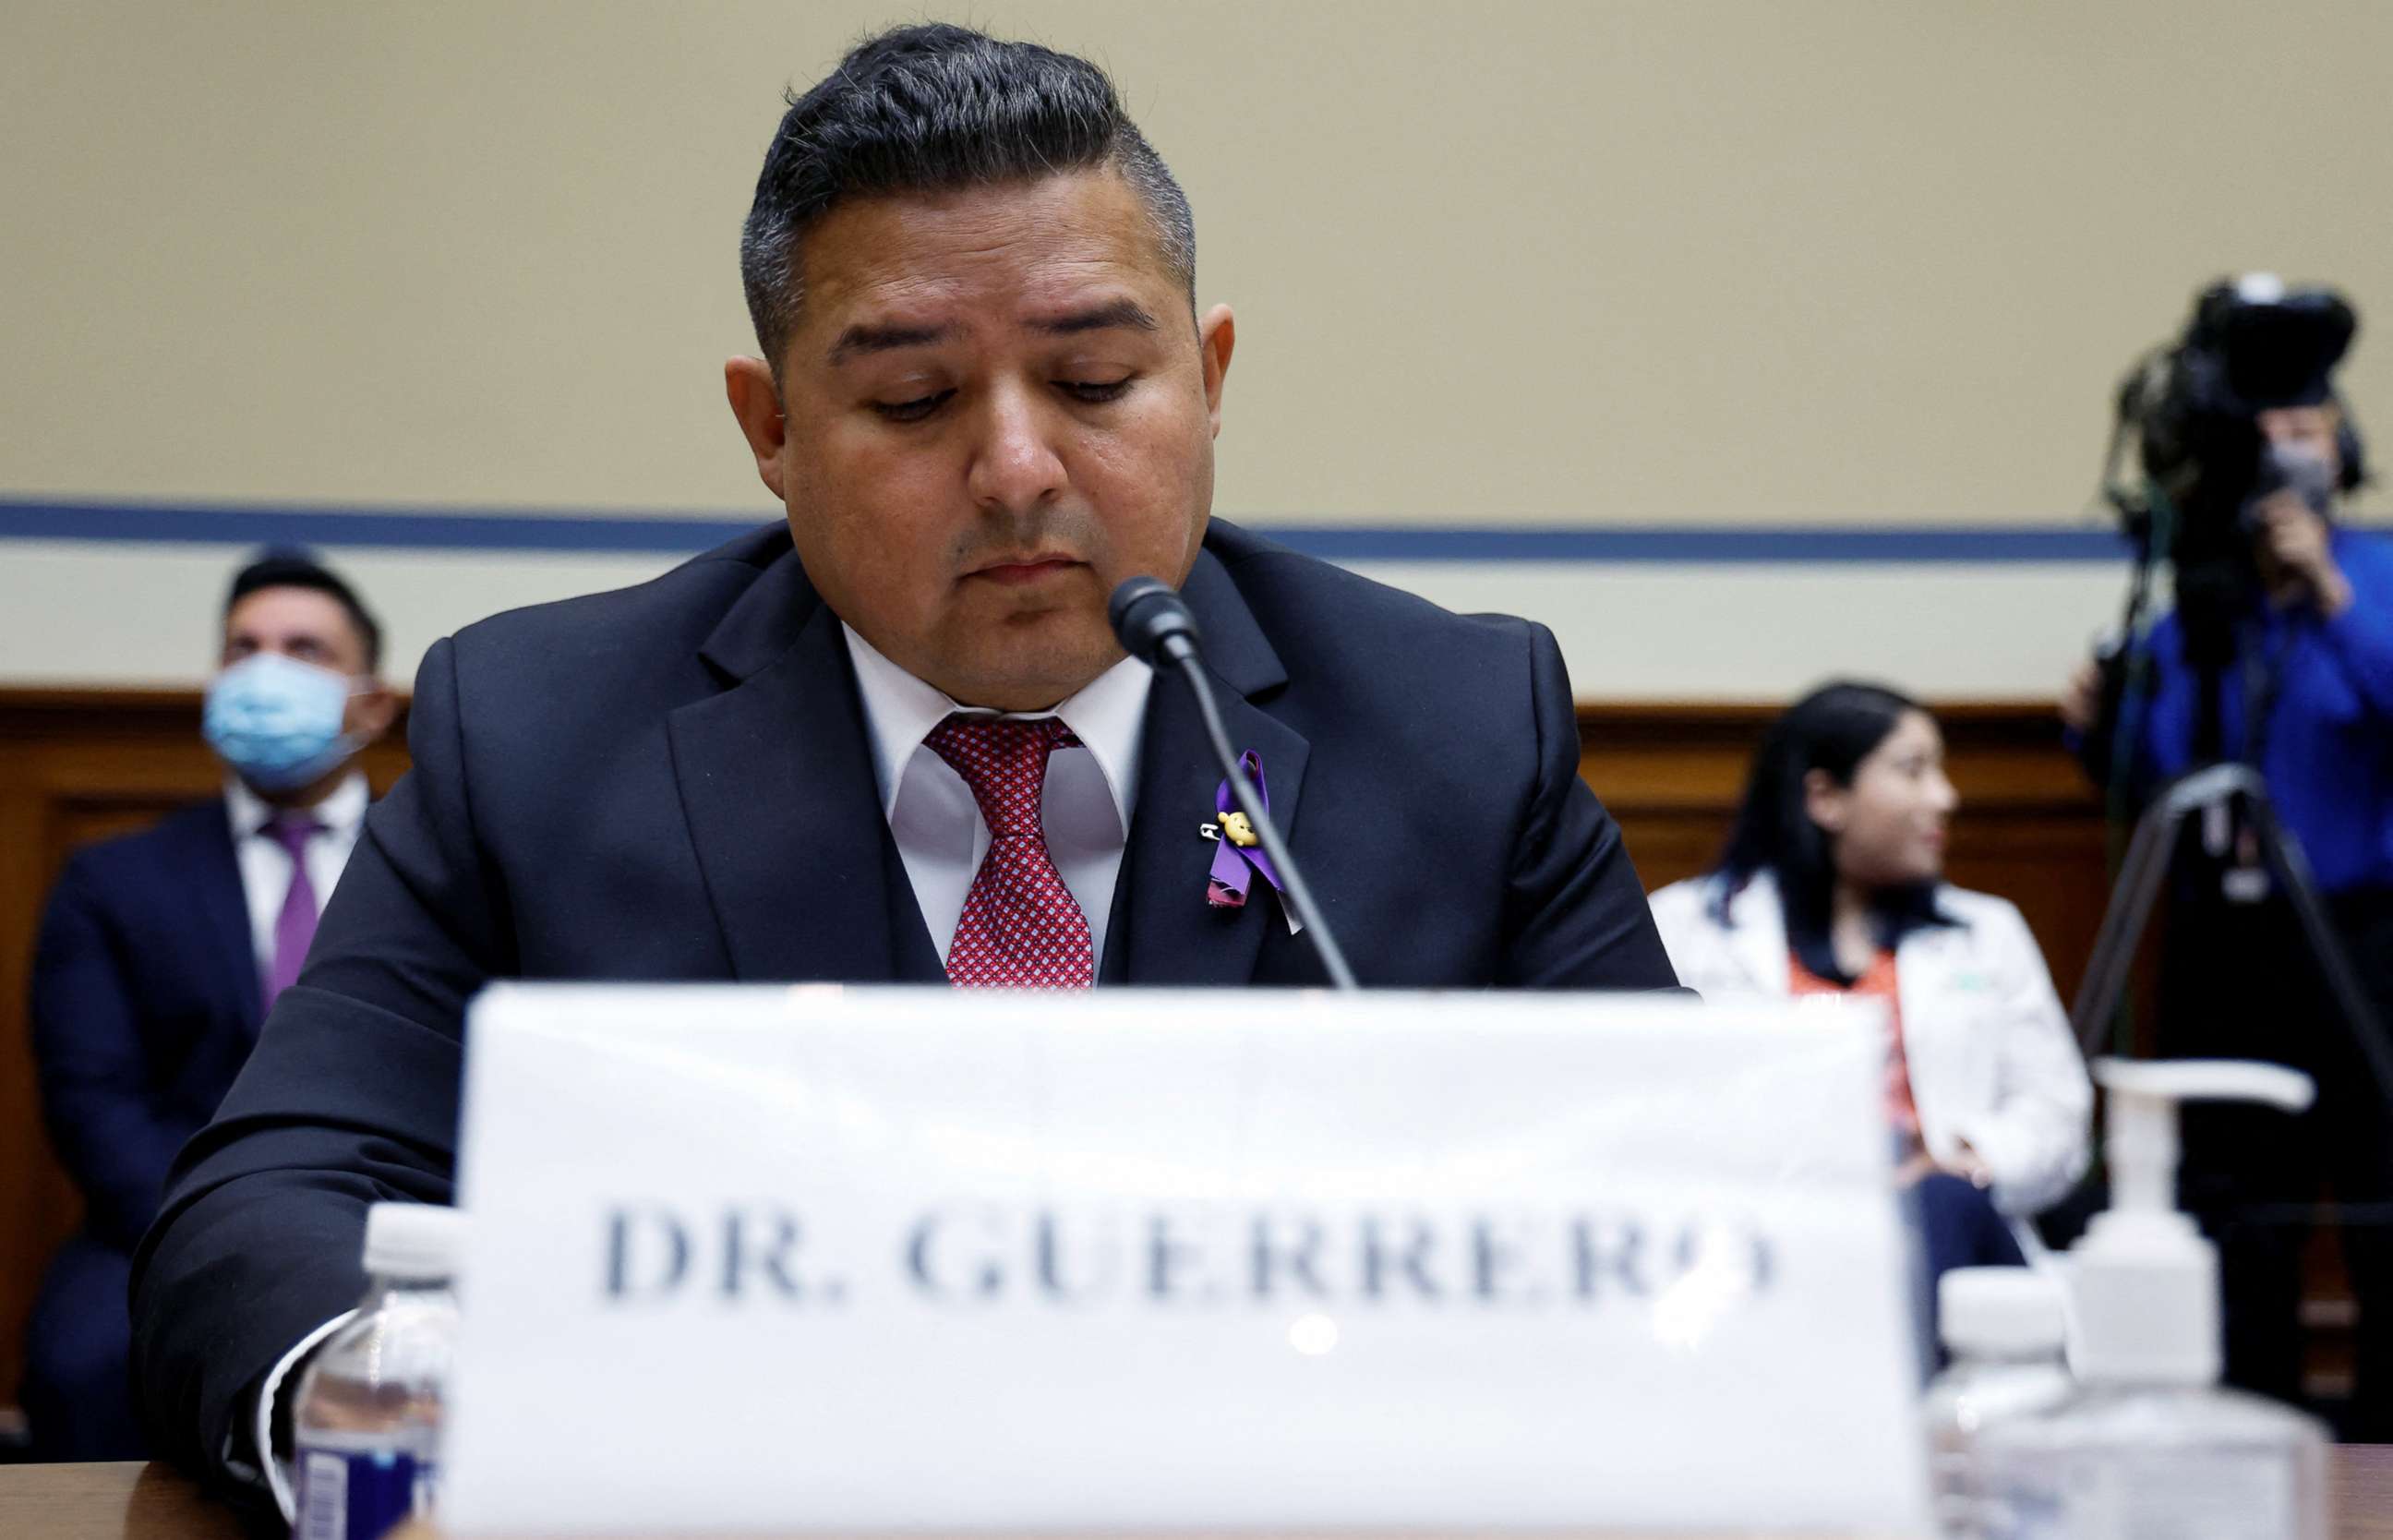 PHOTO: Pediatrician Dr. Roy Guerrero of Uvalde, Texas attends a House Oversight Committee hearing on "The Urgent Need to Address the Gun Violence Epidemic," on Capitol Hill in Washington, D.C., June 8, 2022. 